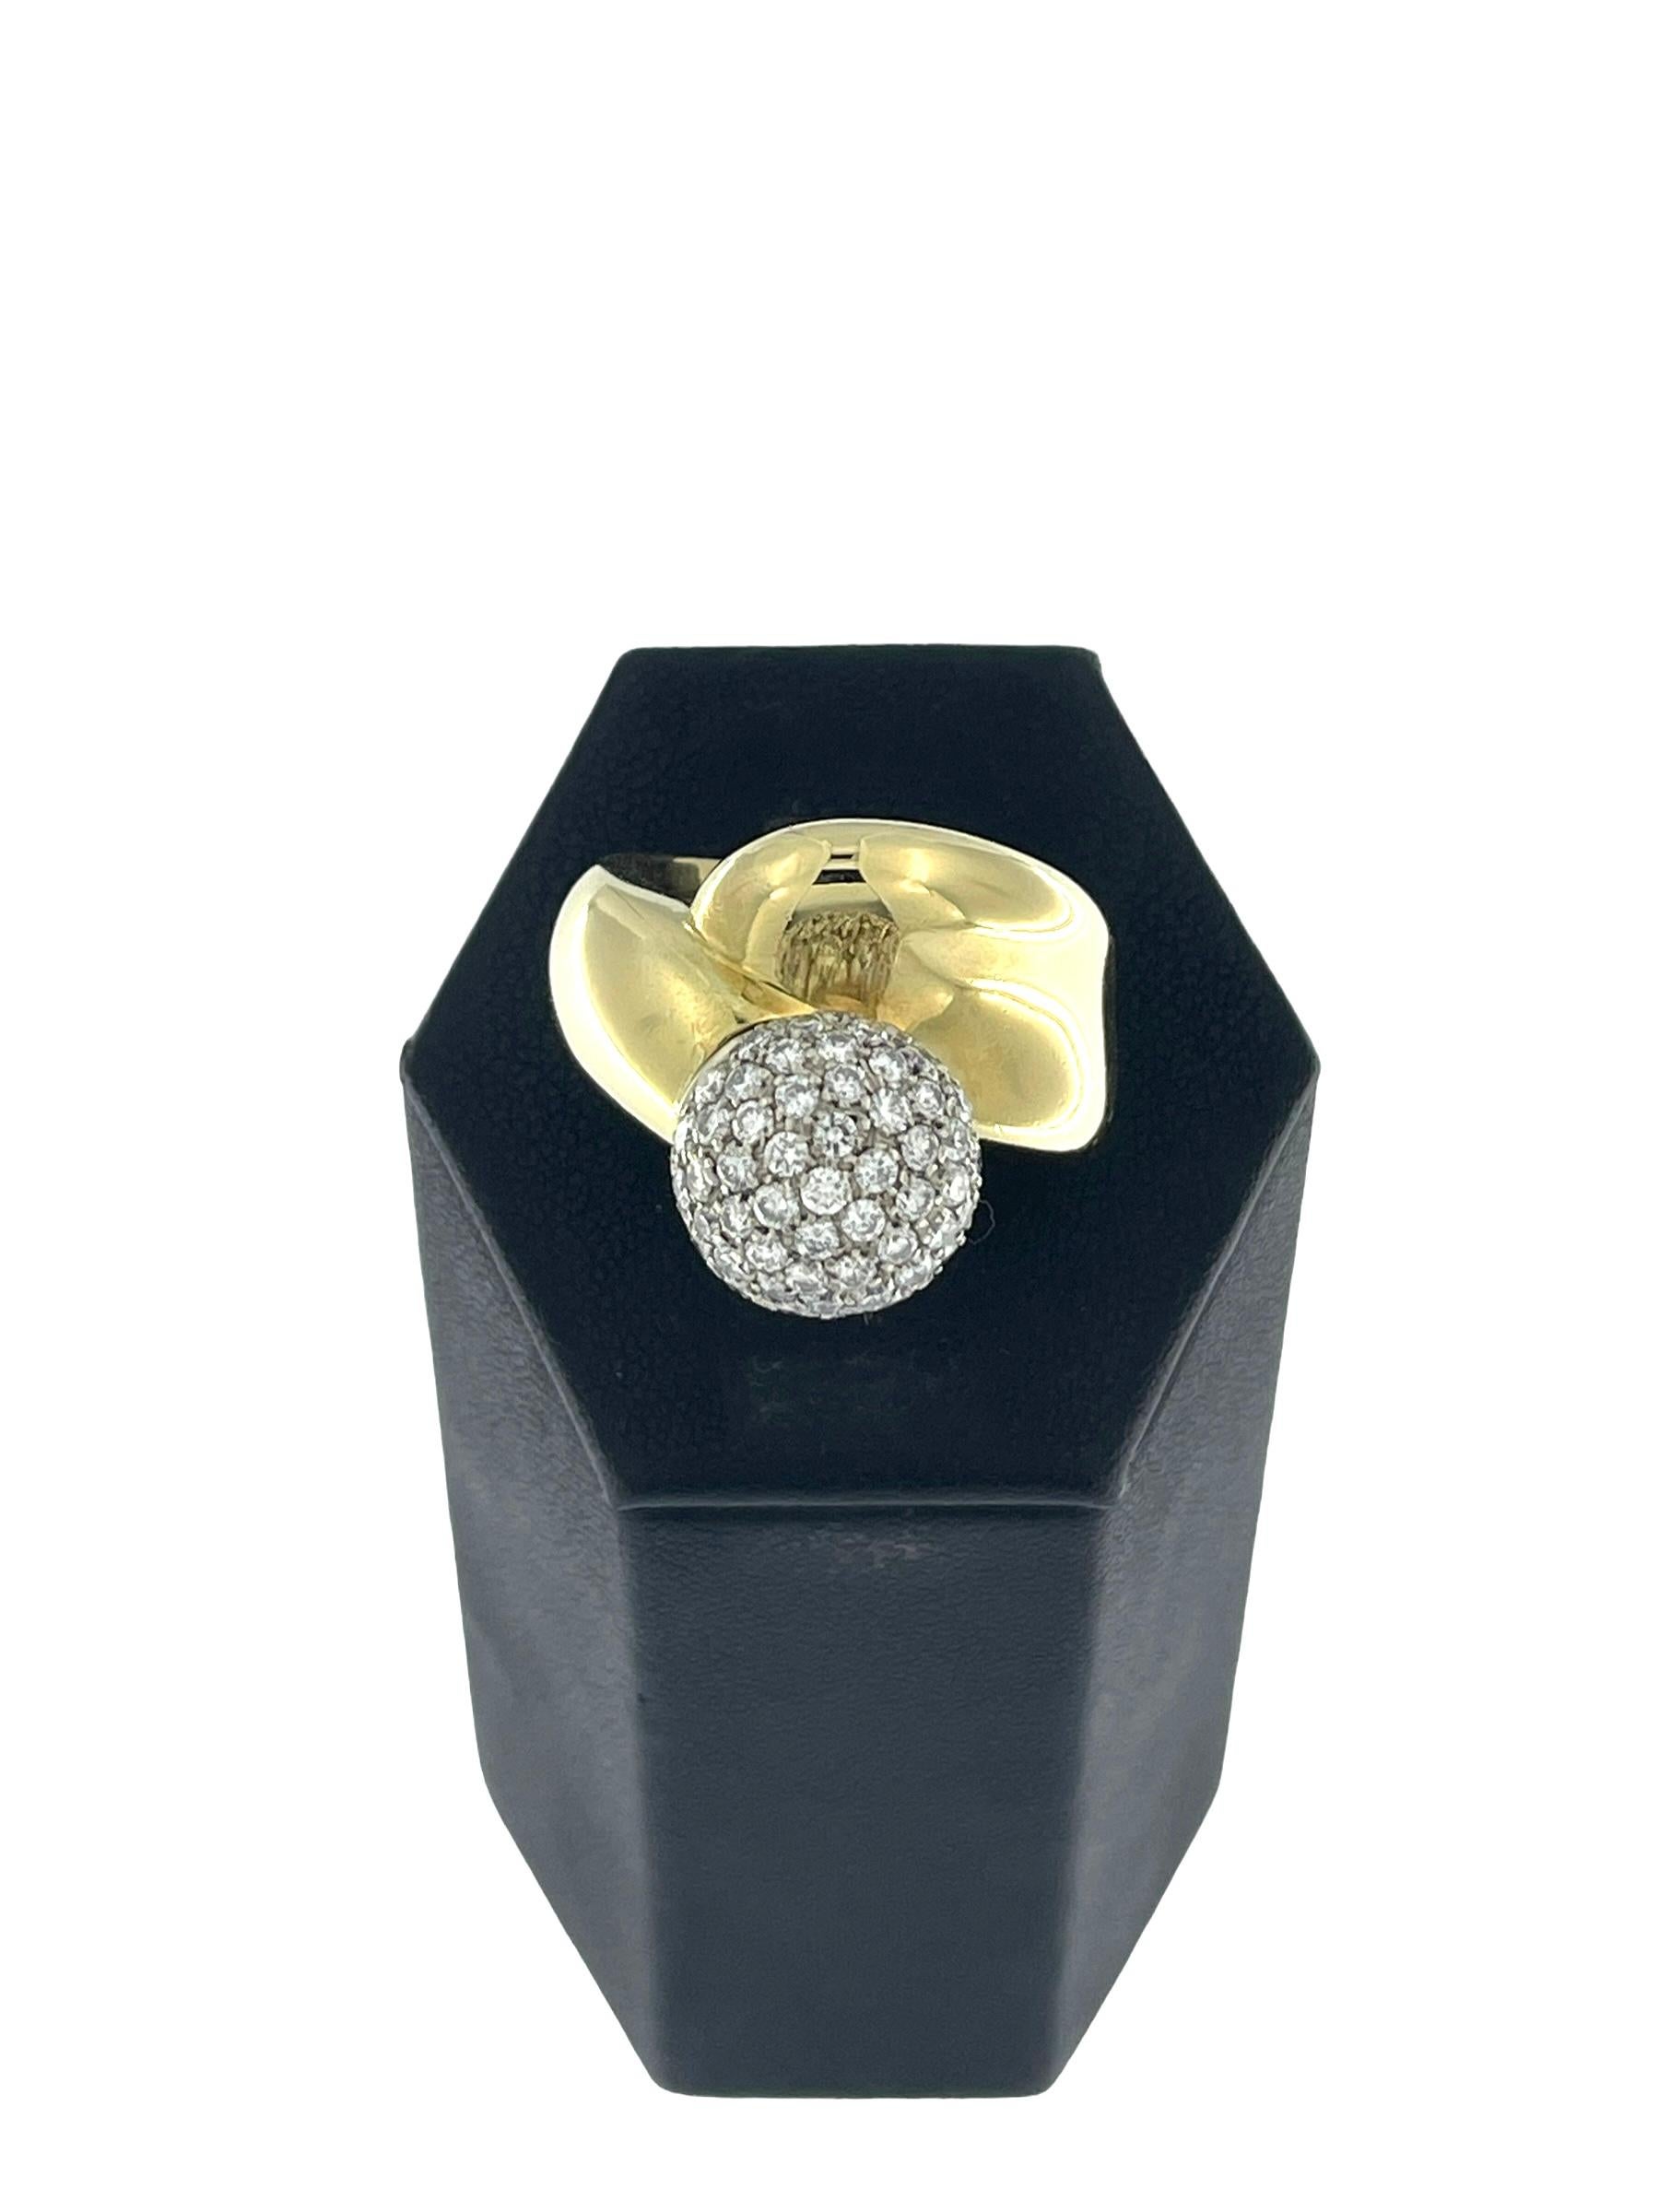 Women's or Men's HRD Certified Retro Style Gold Ring with Diamonds For Sale